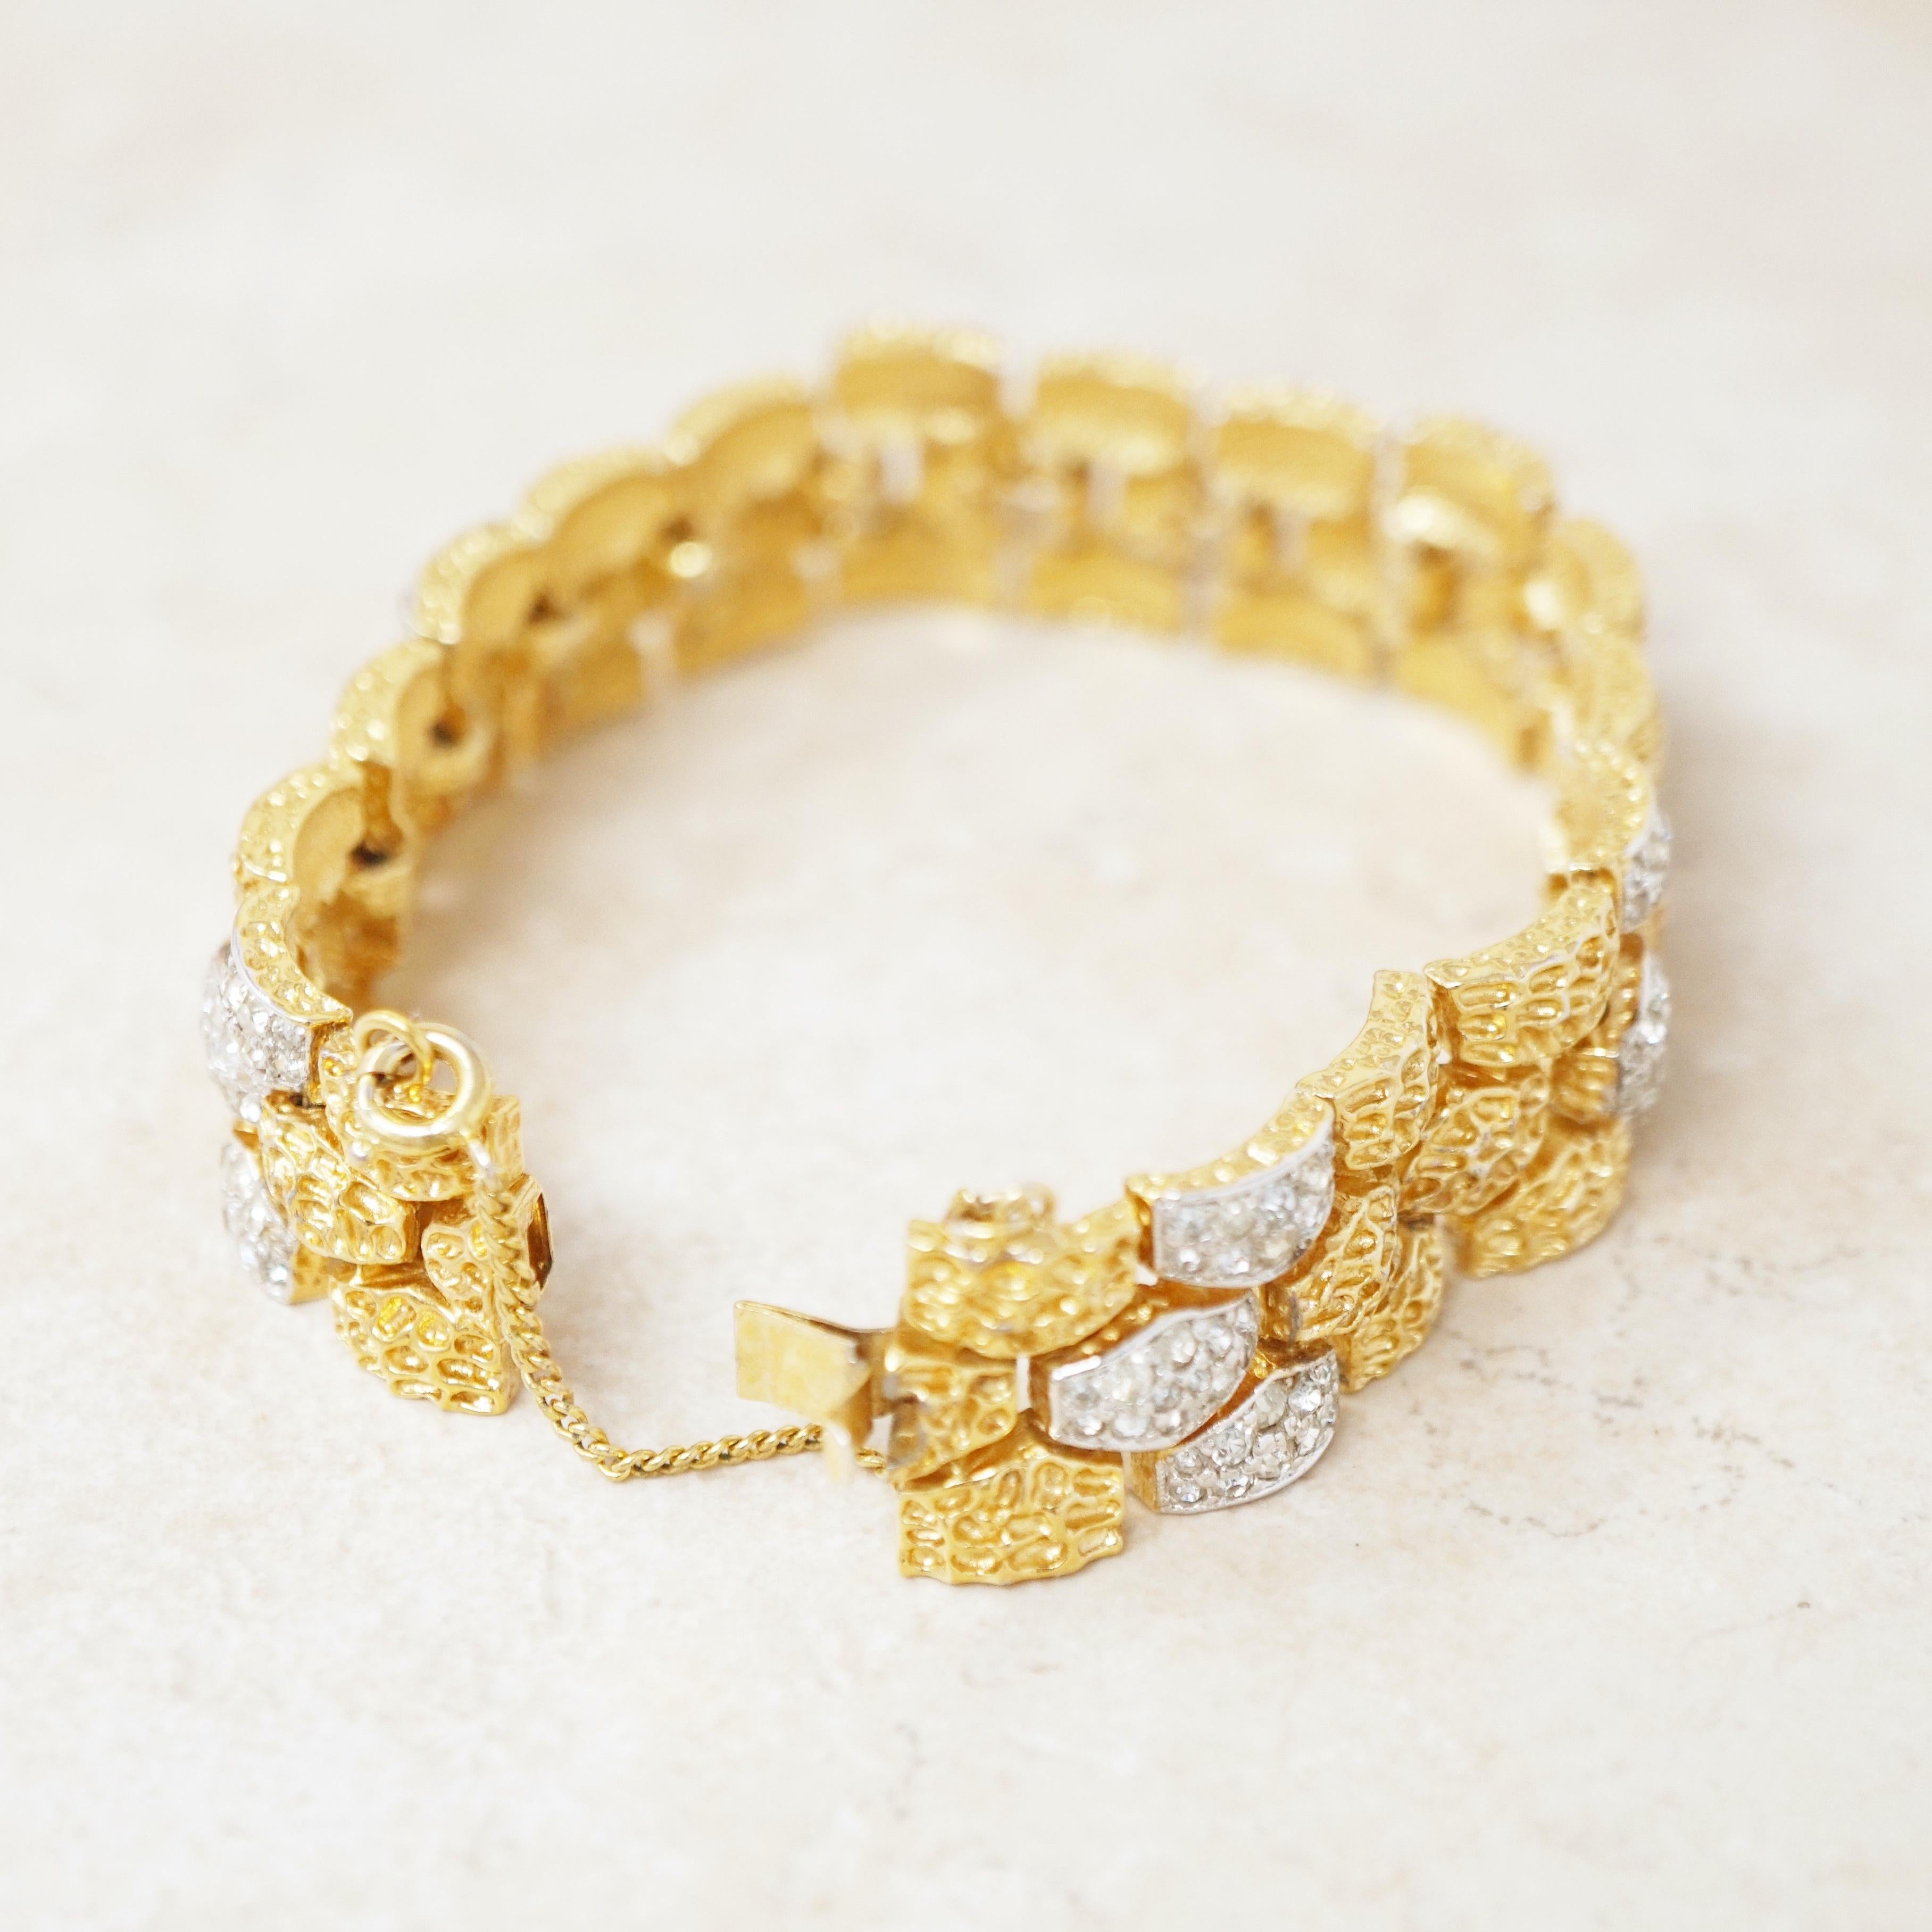 Vintage Two Tone Gilt & Rhinestone Textured Nugget Bracelet by Panetta, 1970s For Sale 7